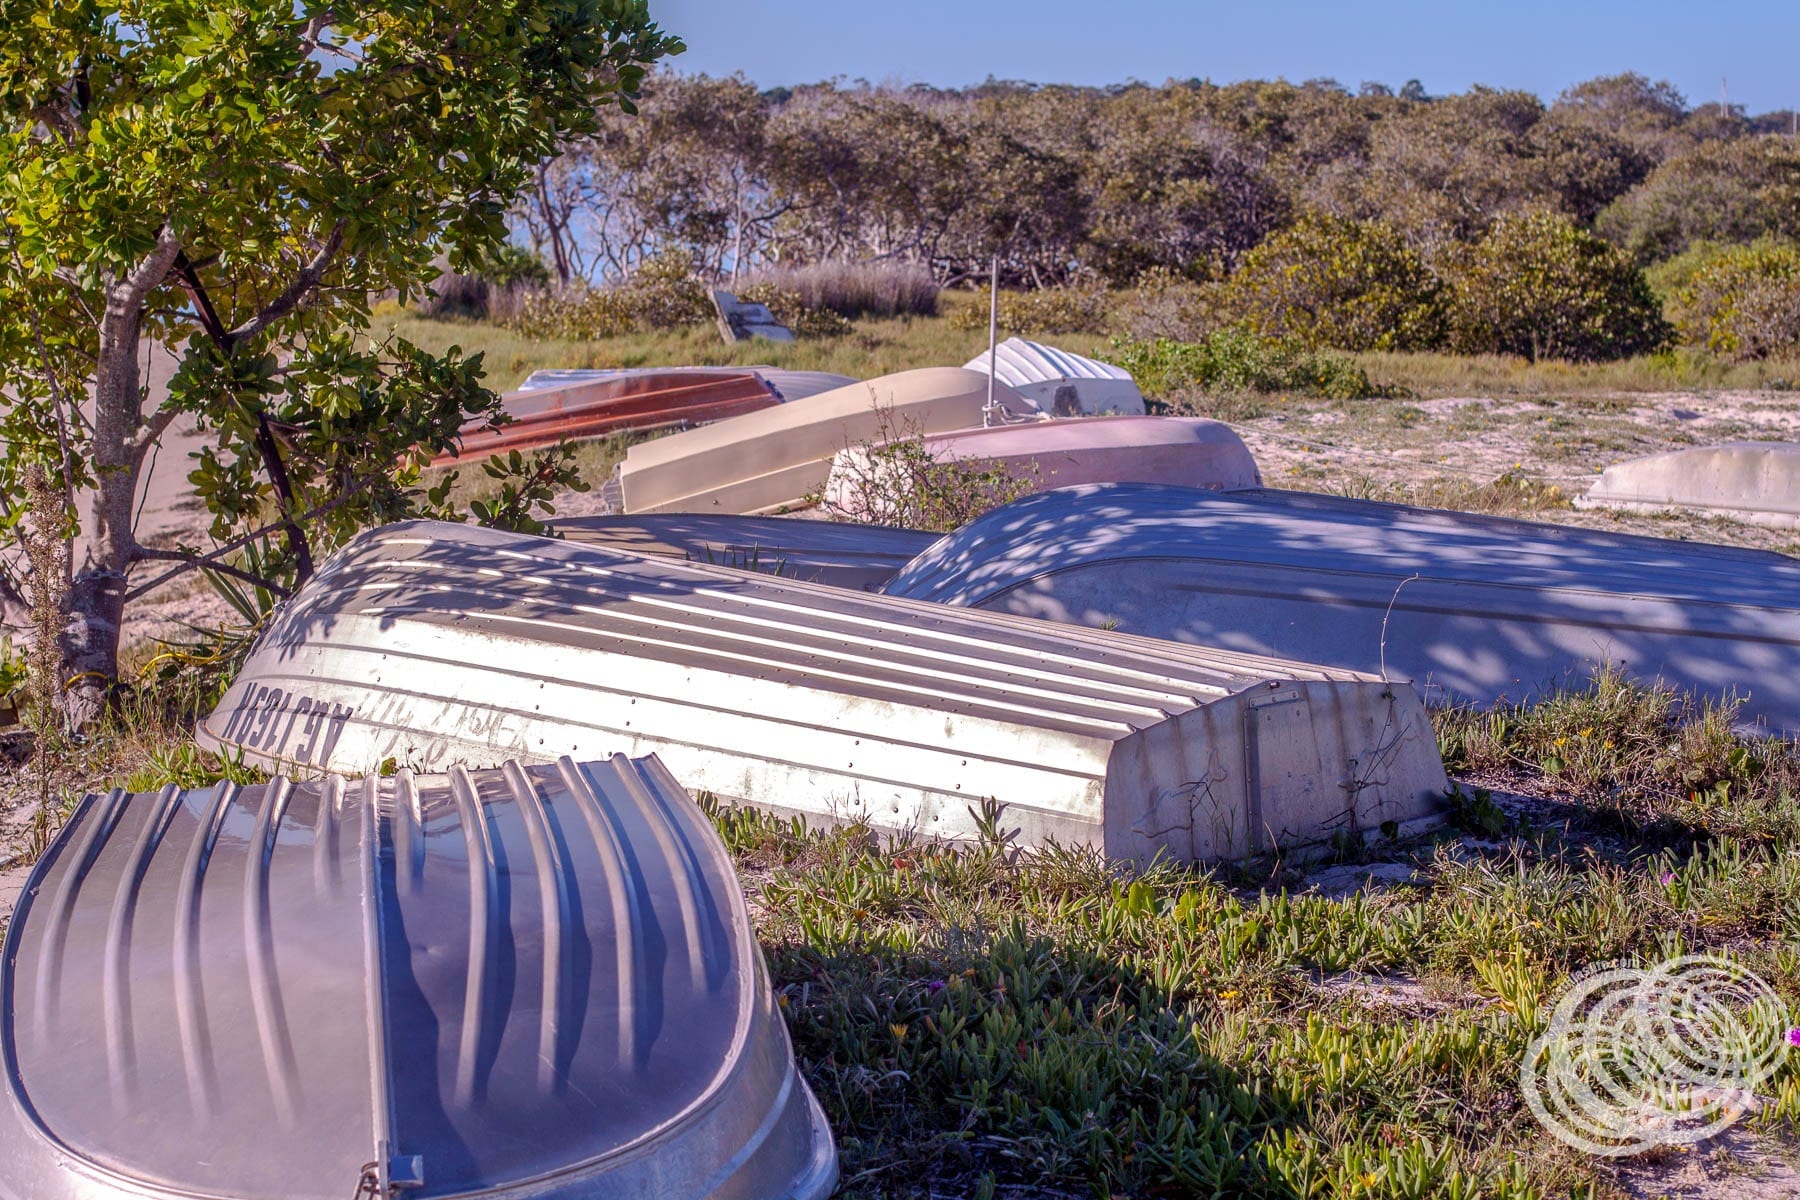 Boats Lined Up at Winda Woppa on the bank of the Myall River